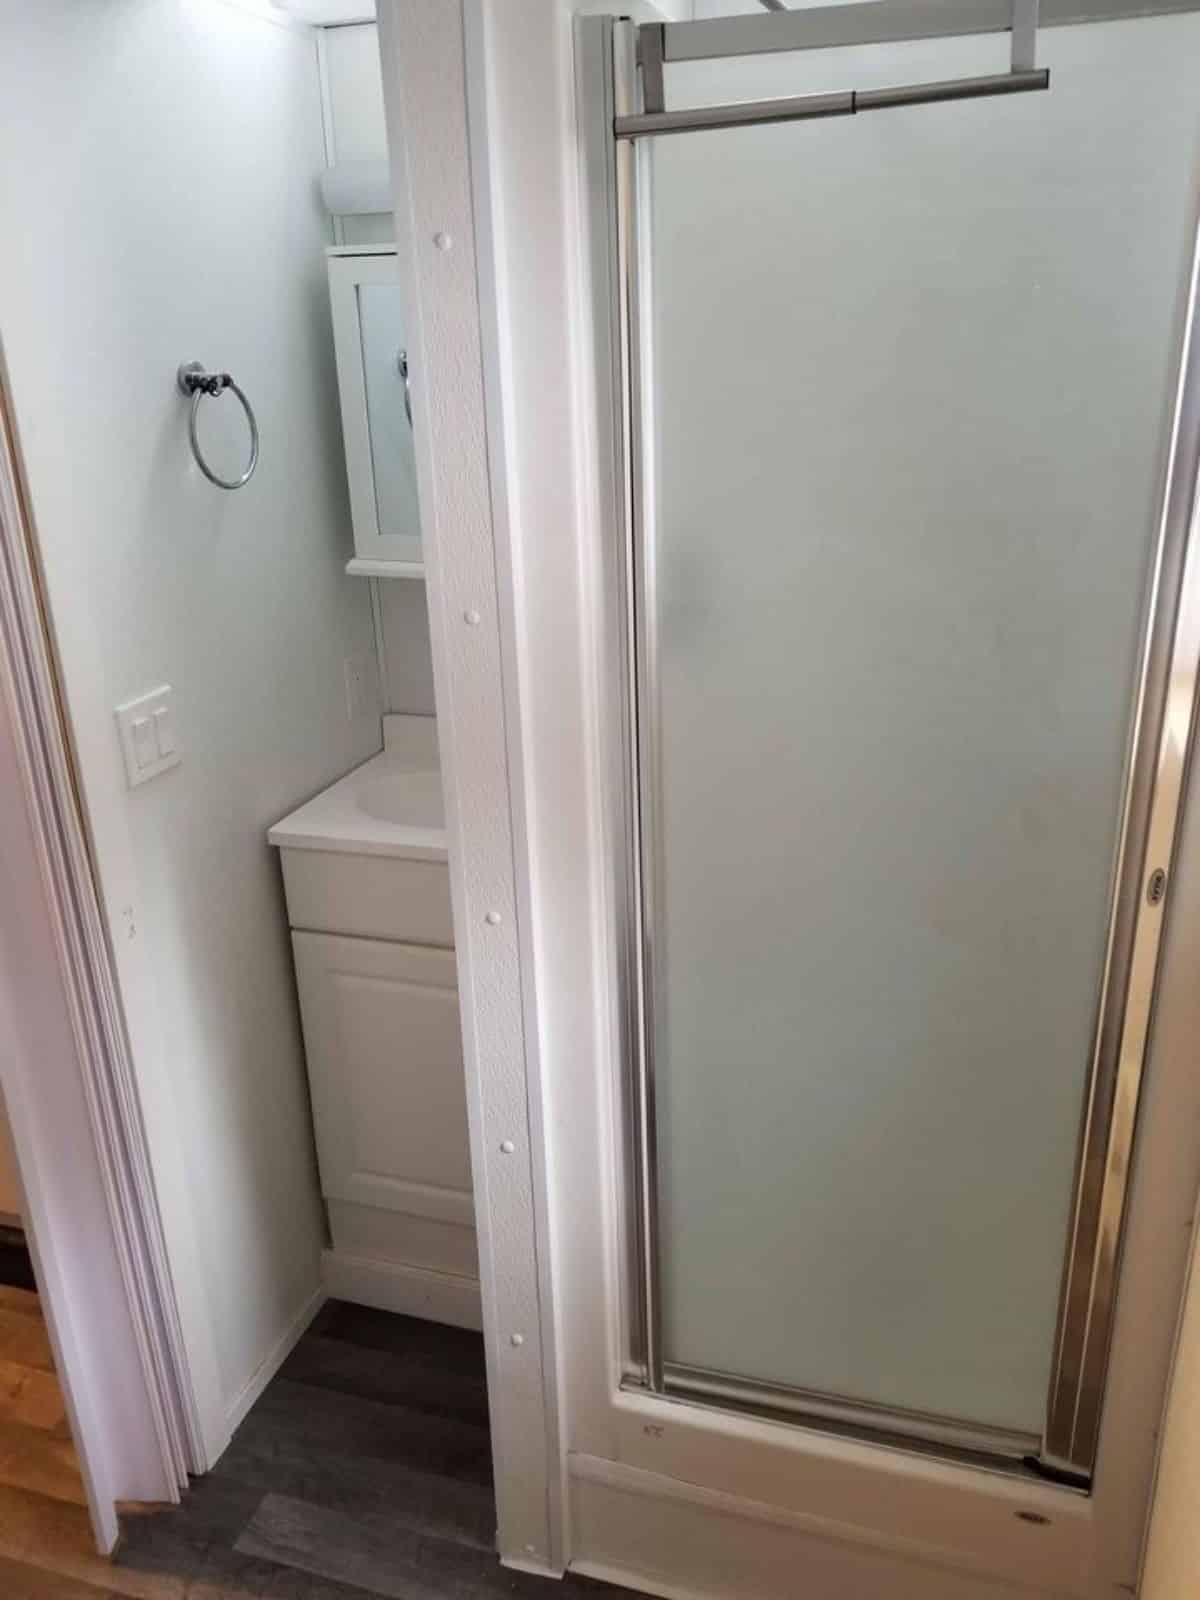 sink with vanity and mirror plus separate shower area with glass enclosure in bathroom